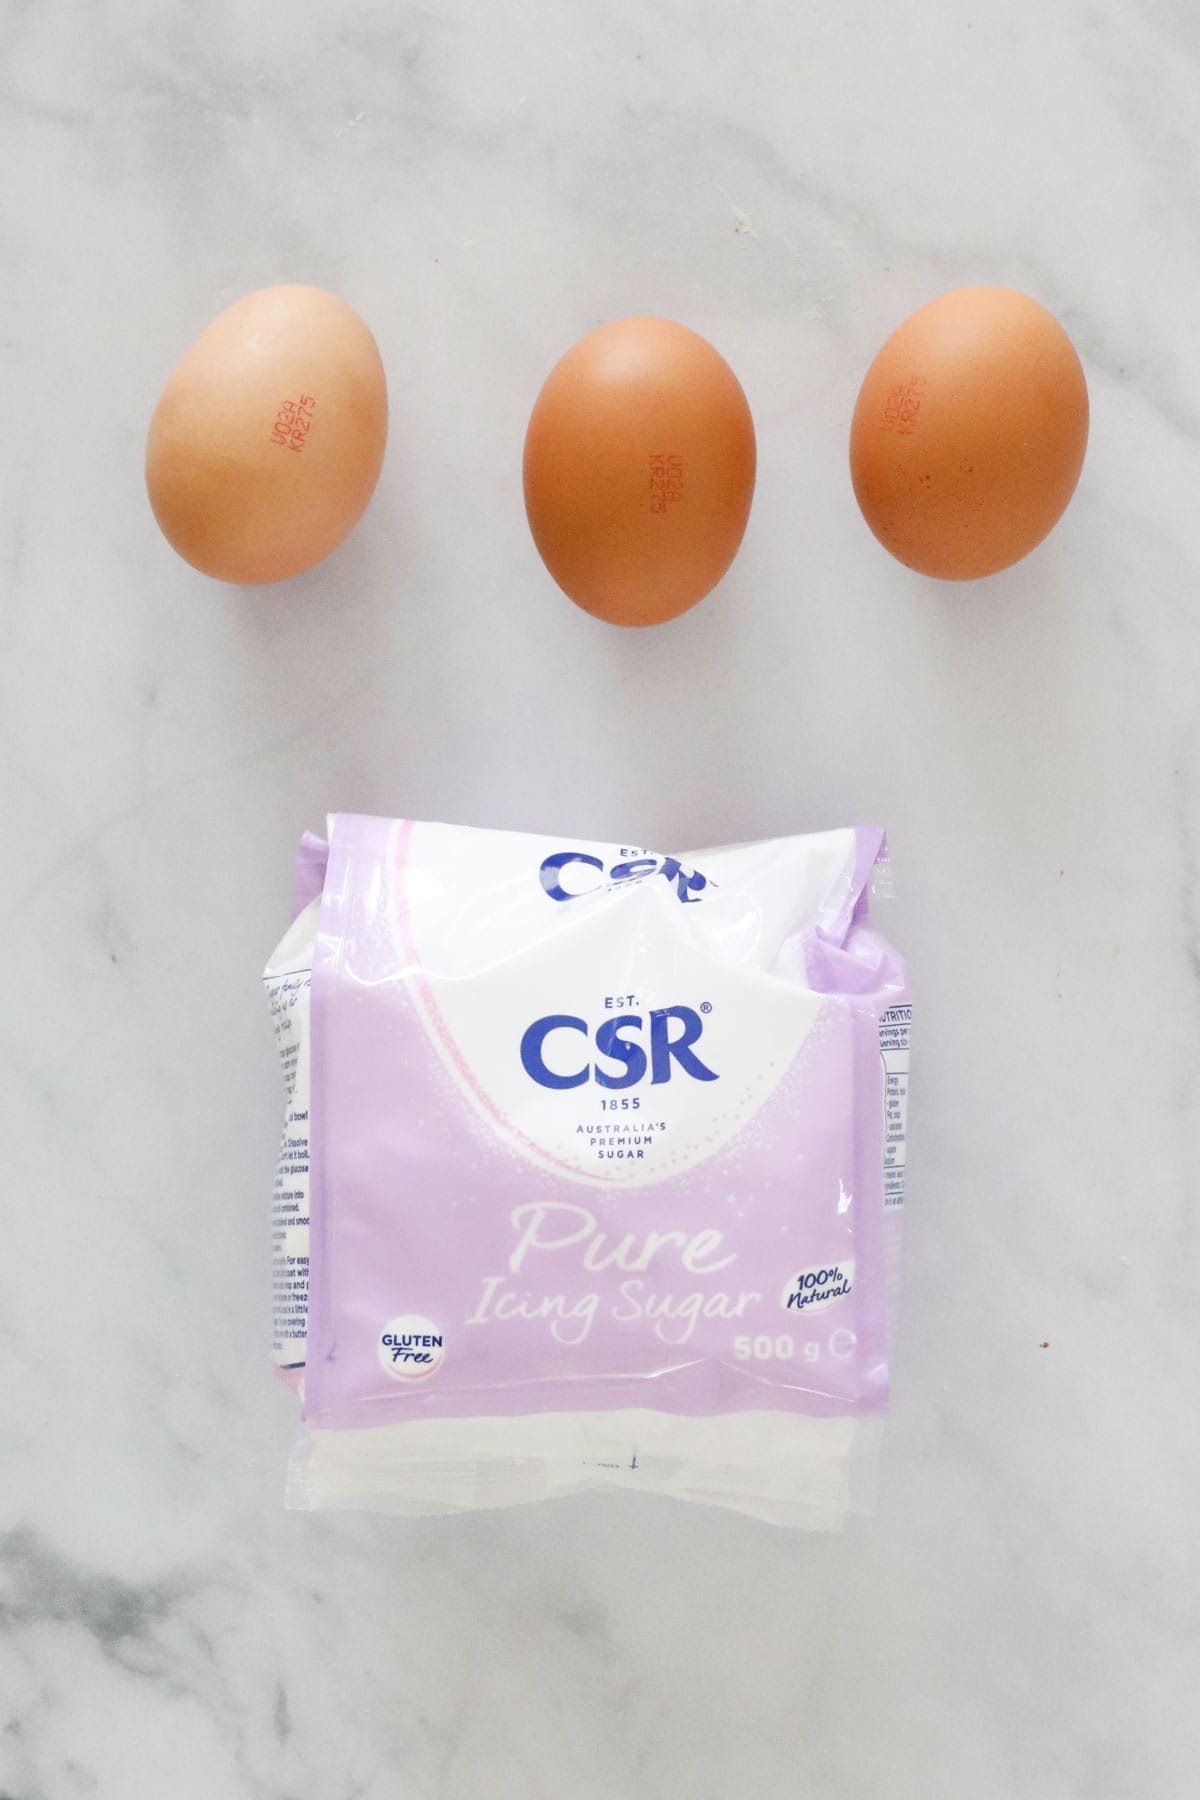 Eggs and pure icing sugar, the ingredients needed to make royal icing.